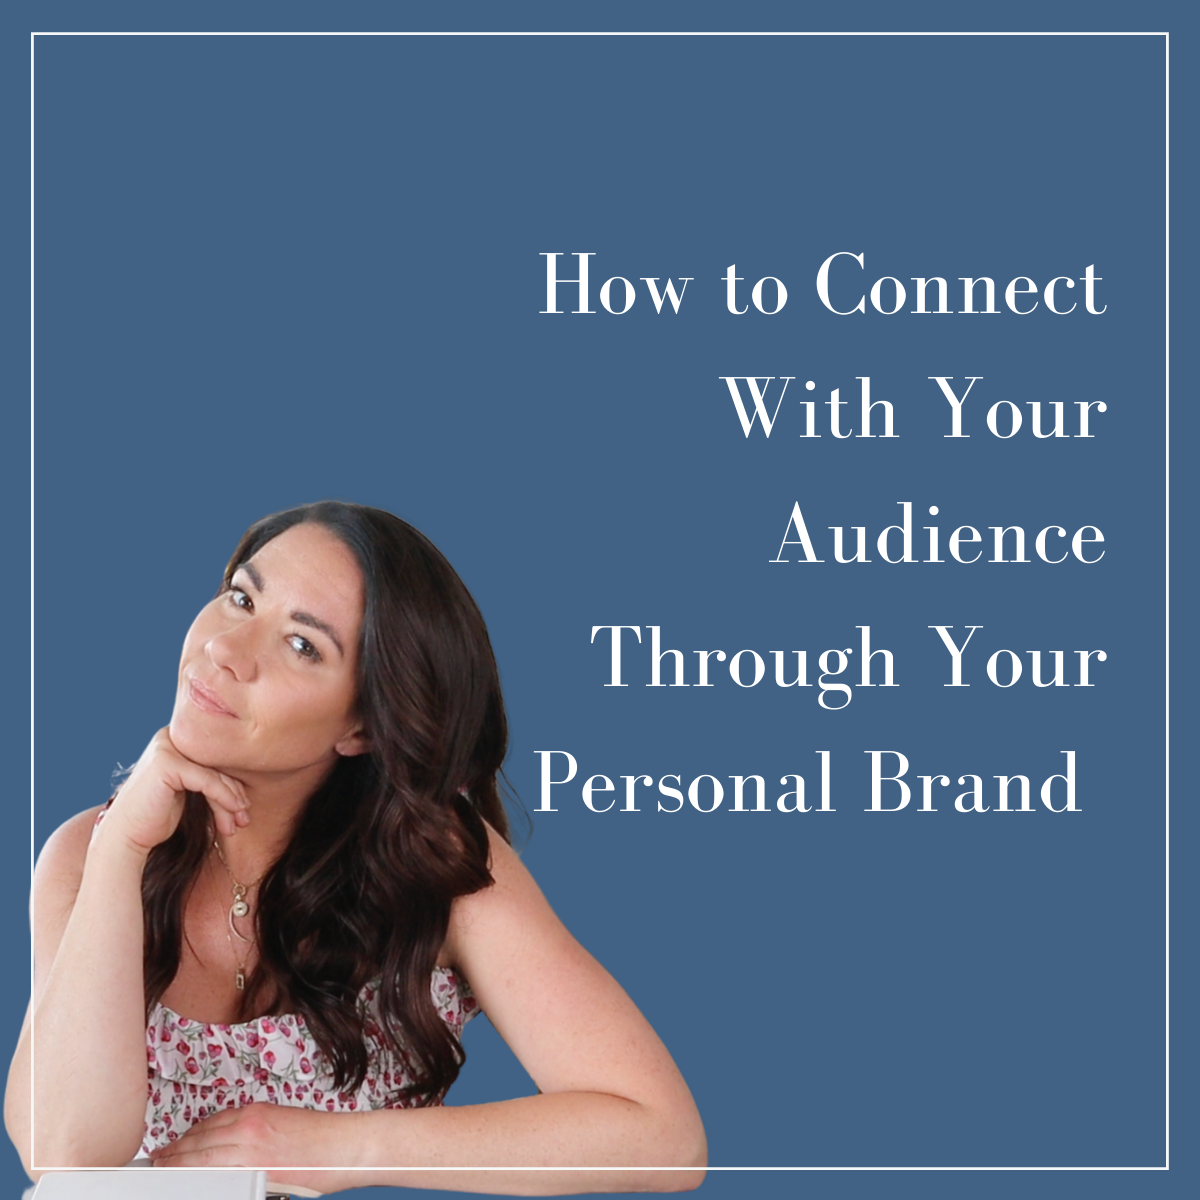 how to connect with your audience through your personal brand | How to Connect With Your Audience by popular New England lifestyle blogger, Shannon Shipman: Pinterest image of how to connect with your audience through your personal brand. 